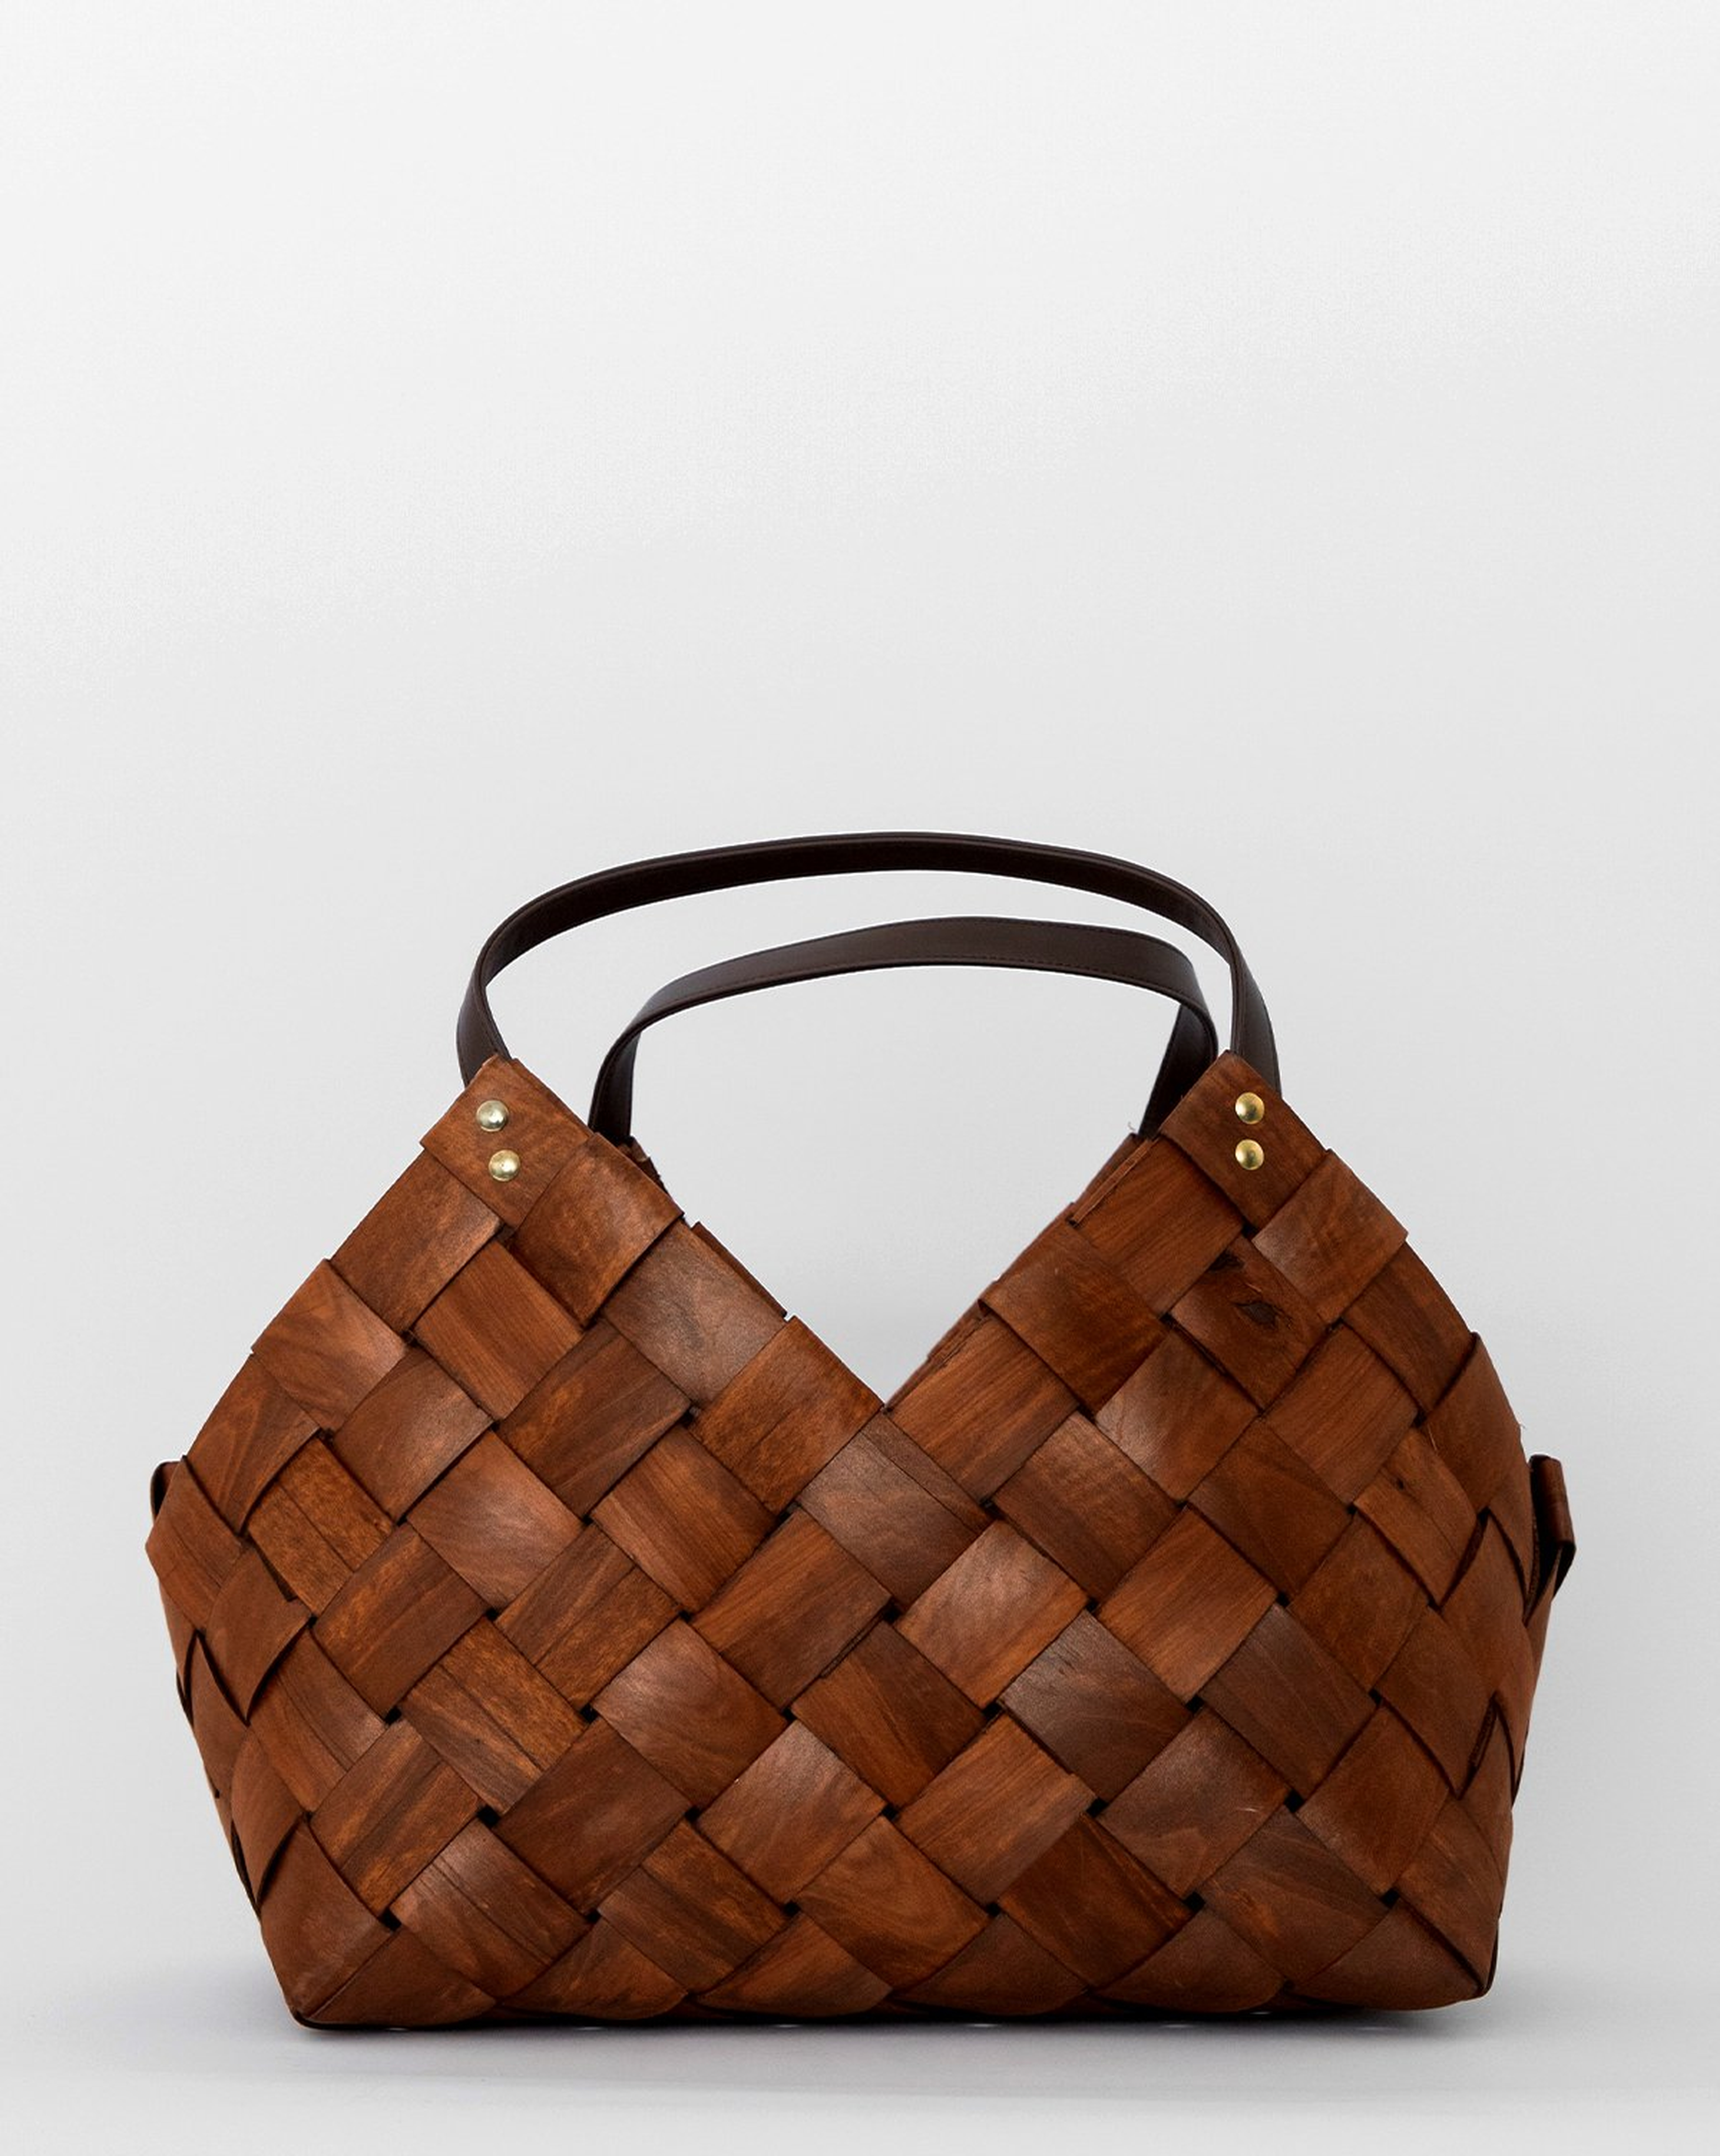 SEAGRASS & LEATHER BASKET - large - McGee & Co.